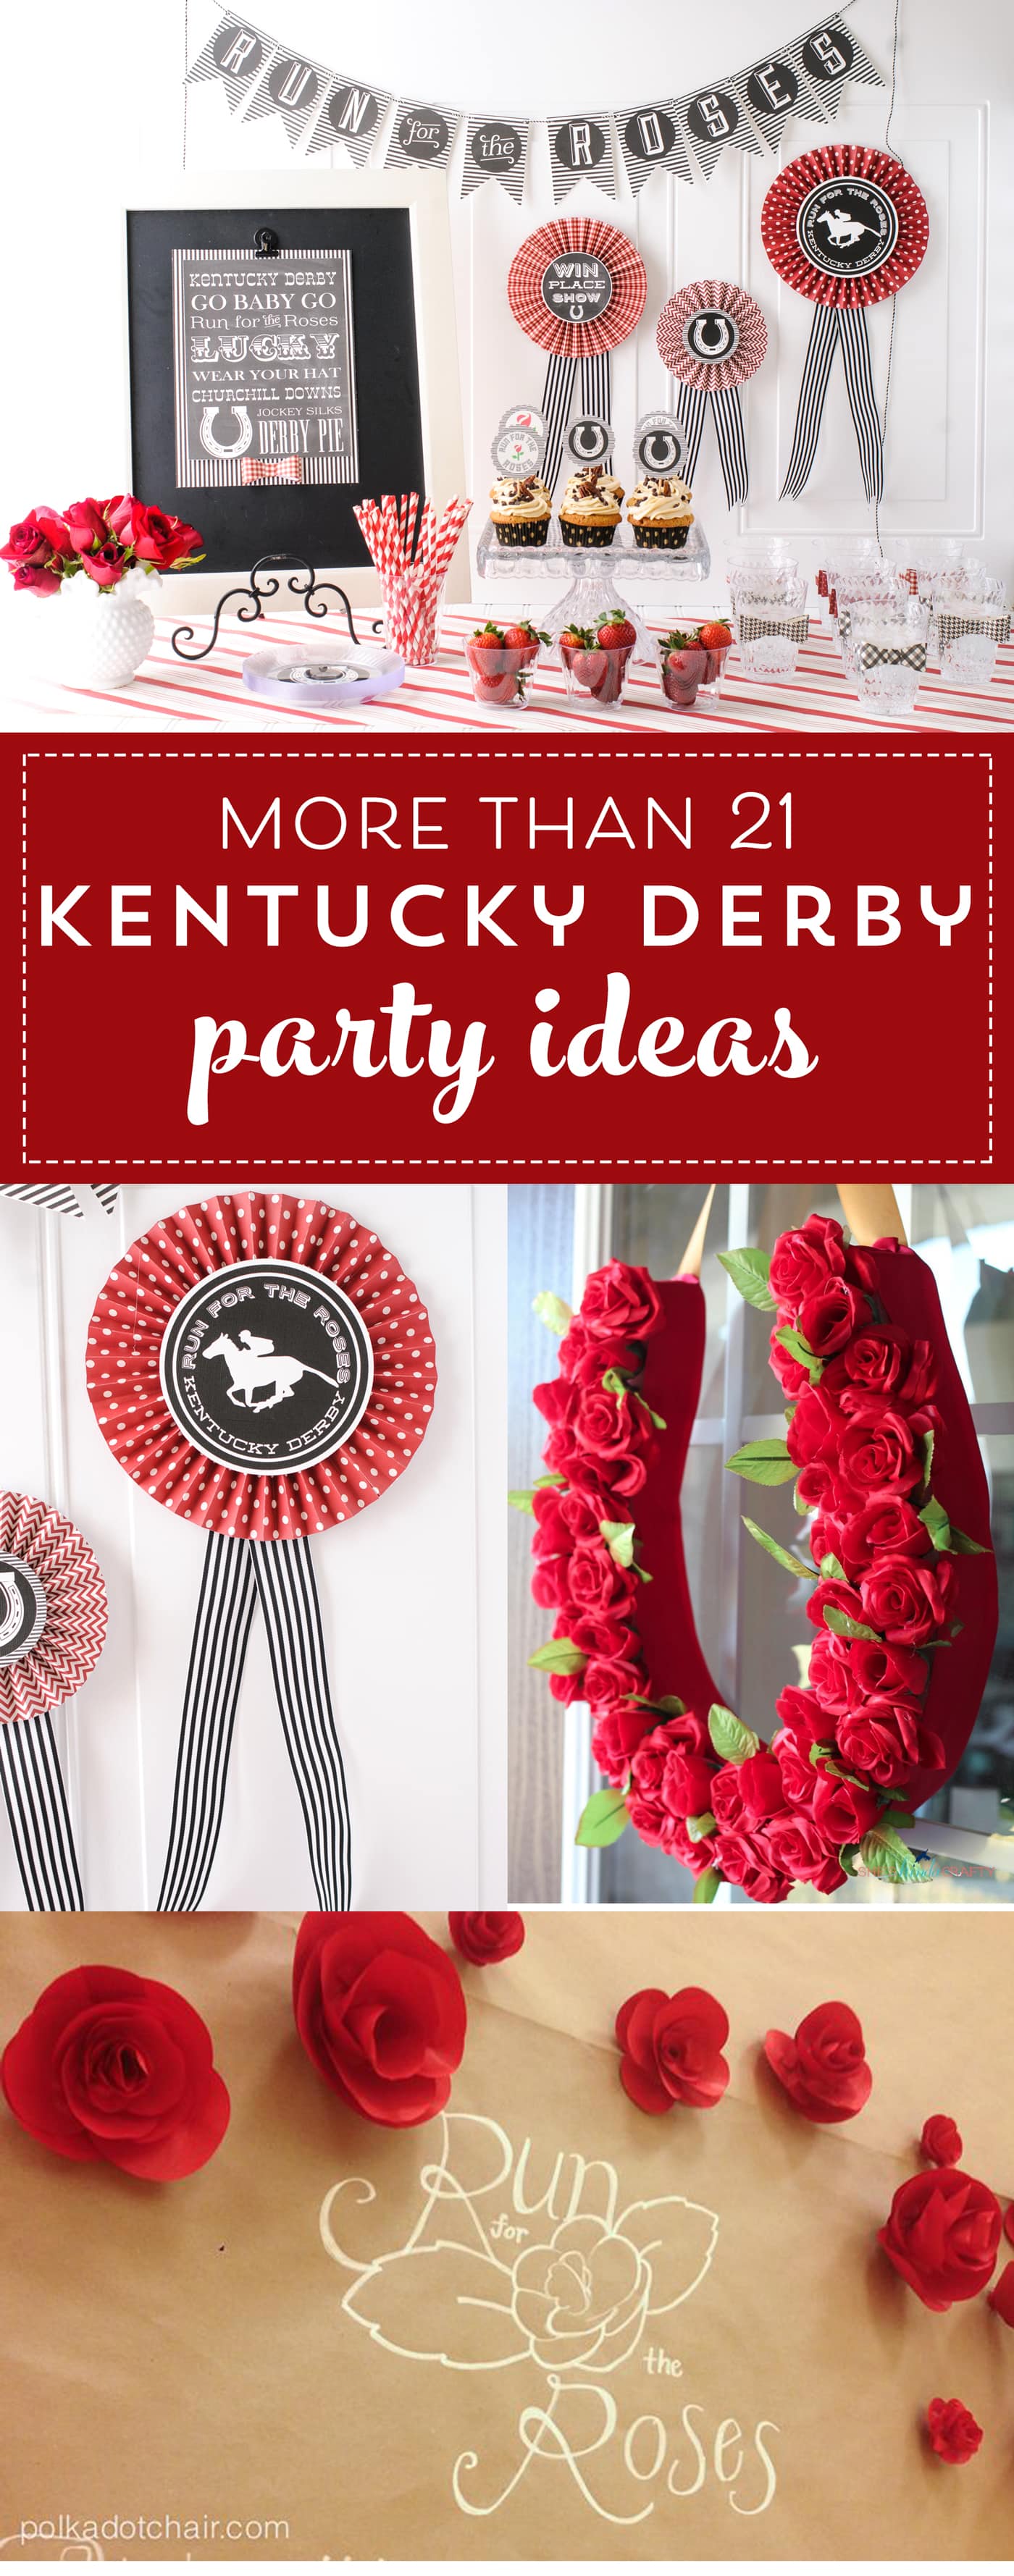 Kentucky Derby Banner Horse Race Party Decorations - Derby Race Run for the  Rose Derby Day Holiday Party Banner Decorations